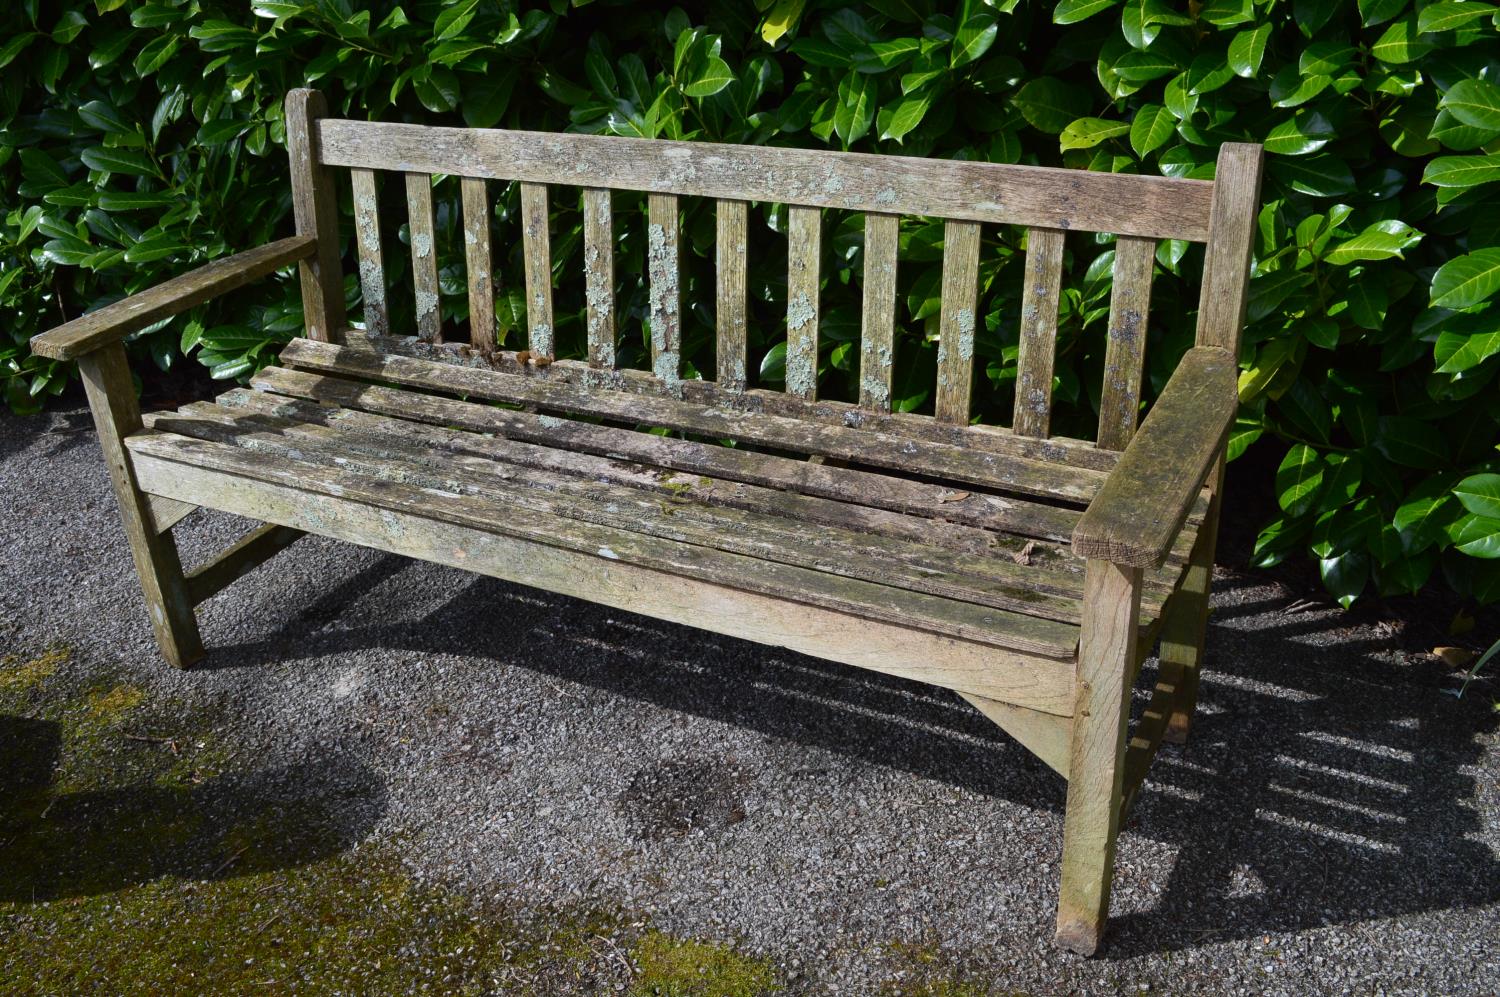 Wooden slatted garden bench - 159cm x 58cm x 83cm tall Please note descriptions are not condition